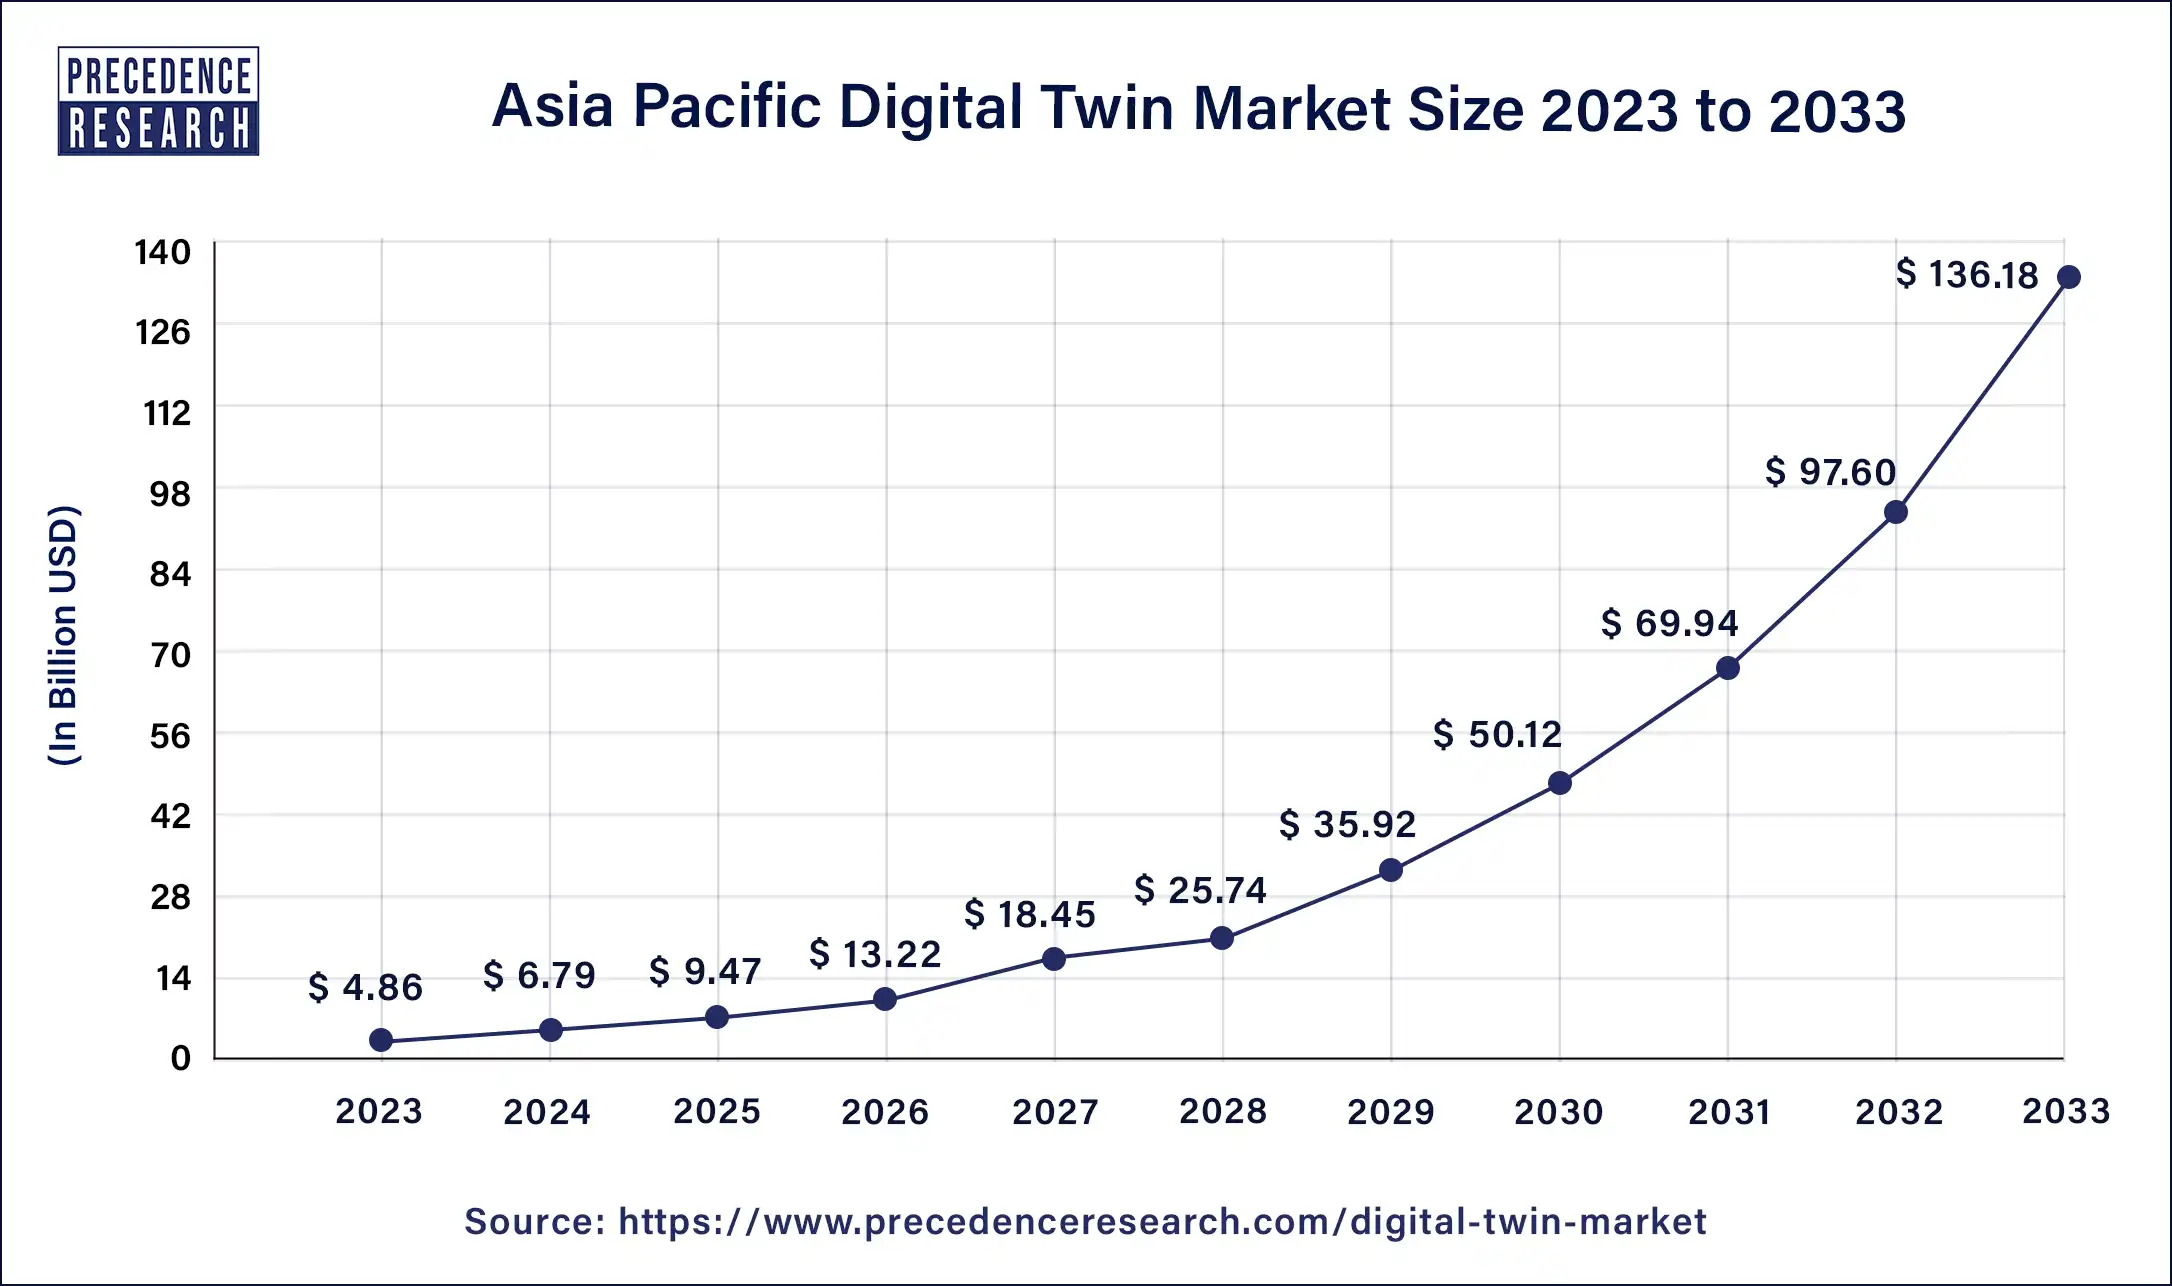 Asia Pacific Digital Twin Market Size 2024 to 2033